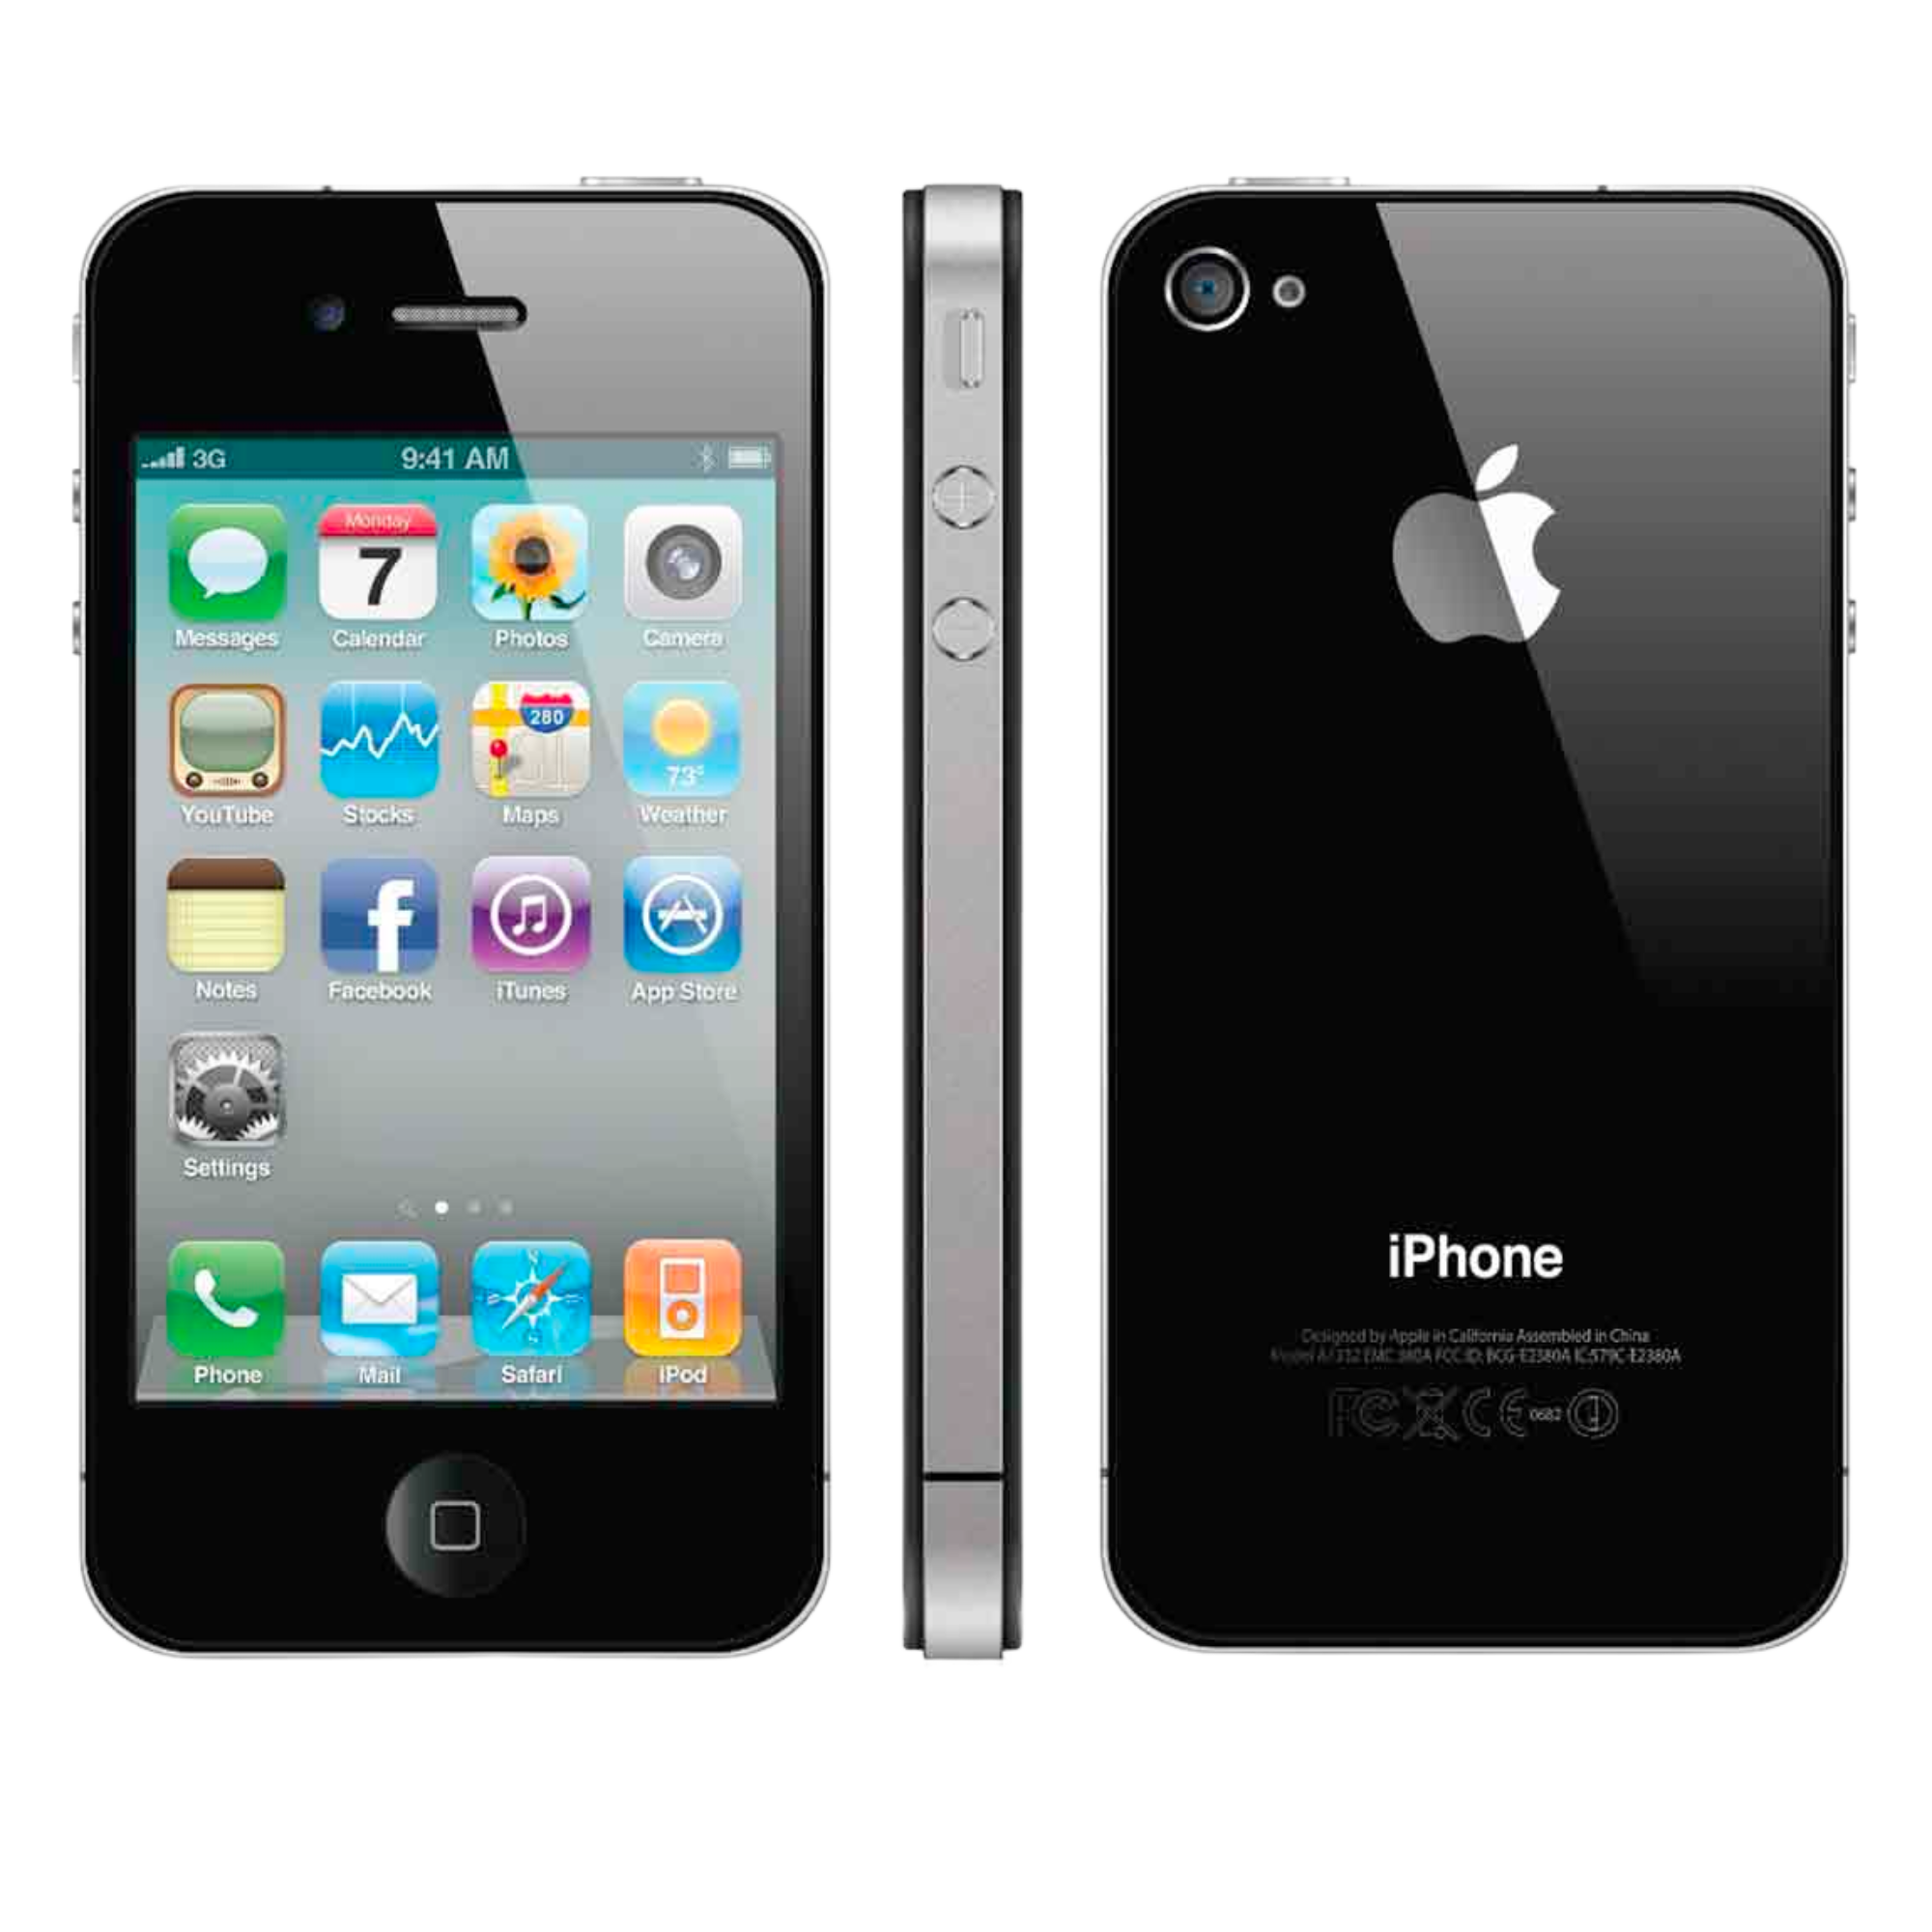 Apple iPhone 4 - Cell phones & accessories